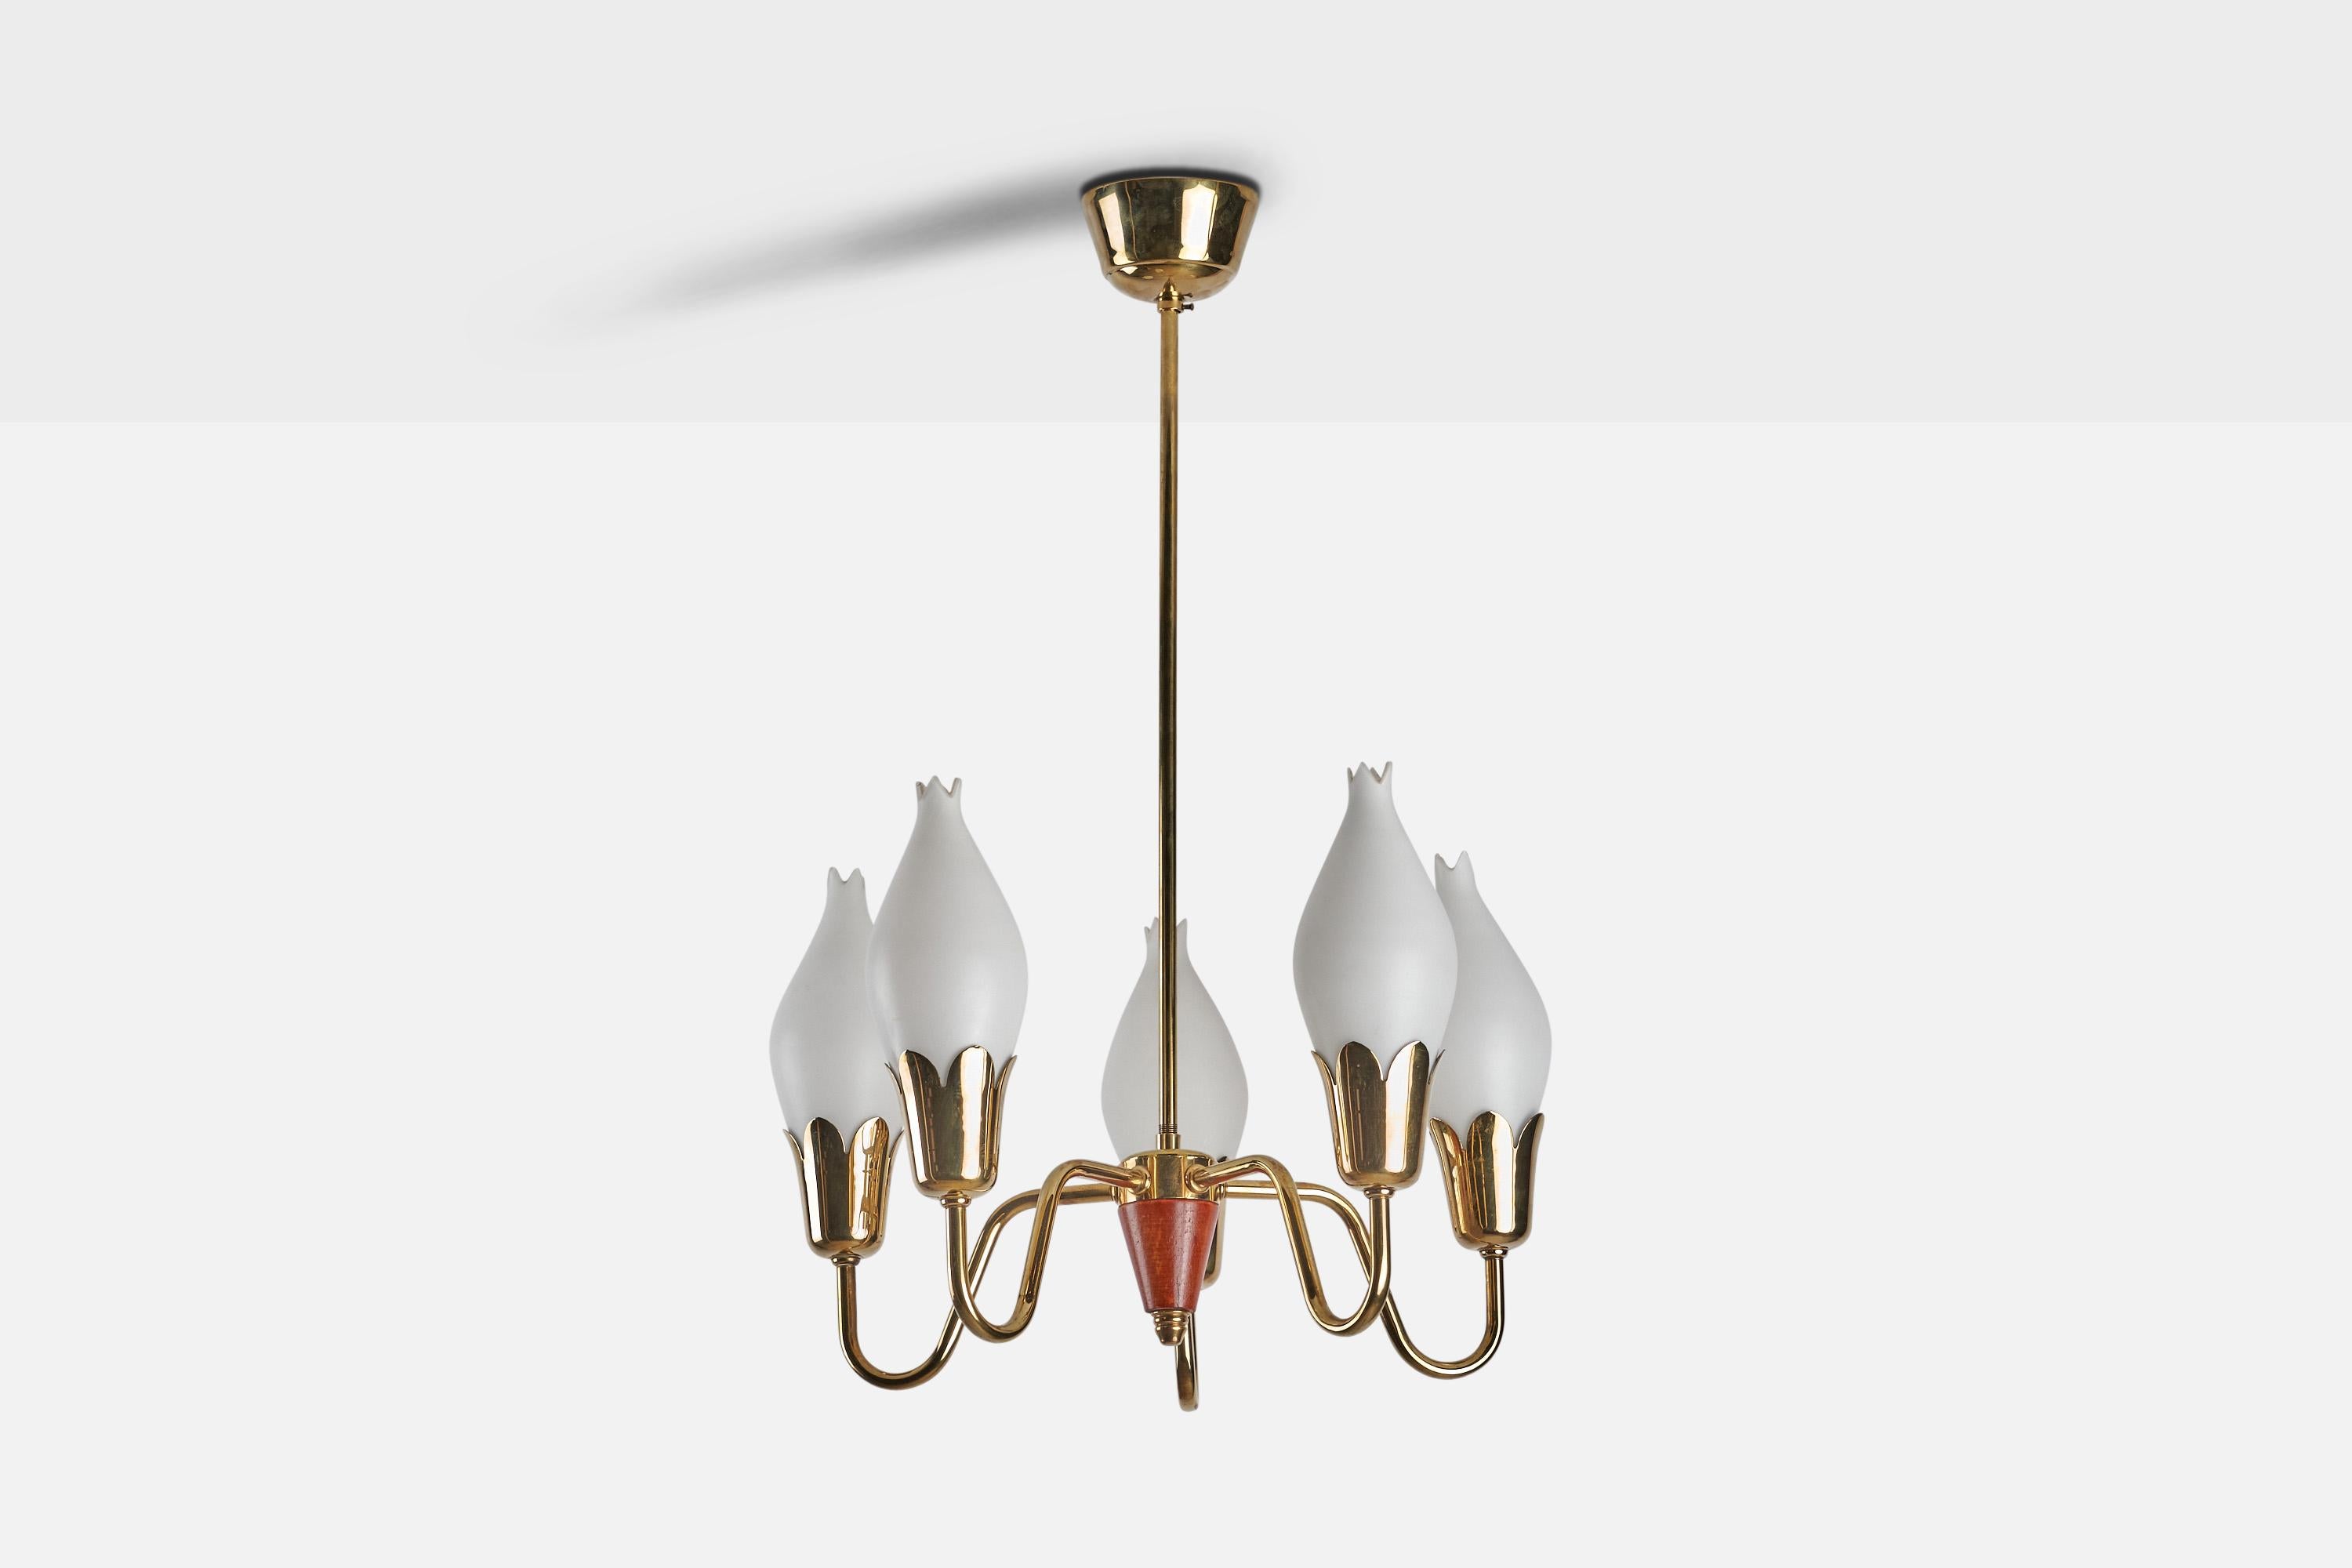 
A brass, teak and opaline glass chandelier designed and produced by Fog & Mørup, Denmark, 1950s.
Dimensions of canopy (inches) : 2.23” H x 3.62” Diameter
Socket takes standard E-14 bulb. There is no maximum wattage stated on the fixture. All